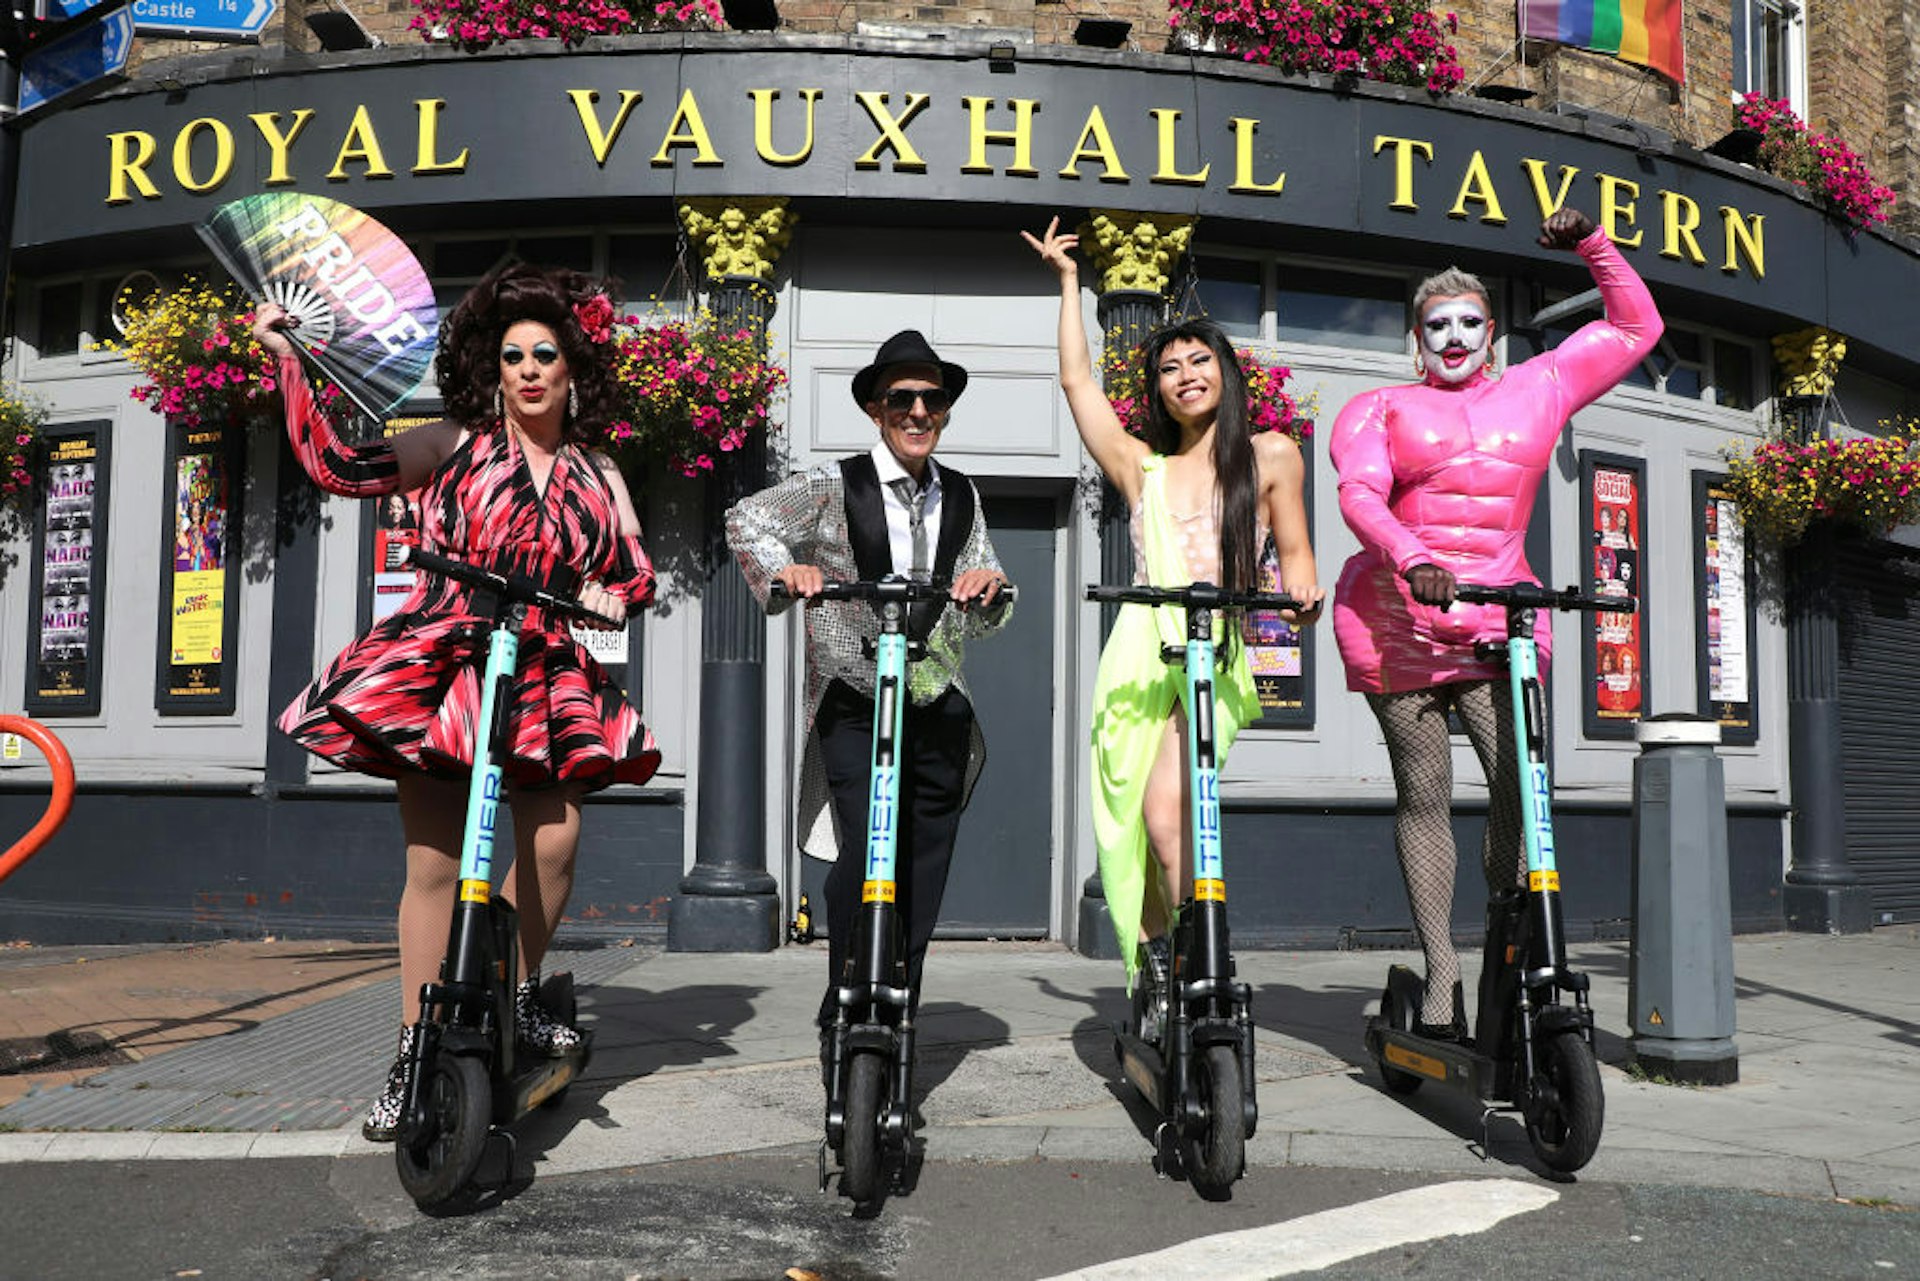 Four drag queens stand on scooters outside the Royal Vauxhall Tavern in London